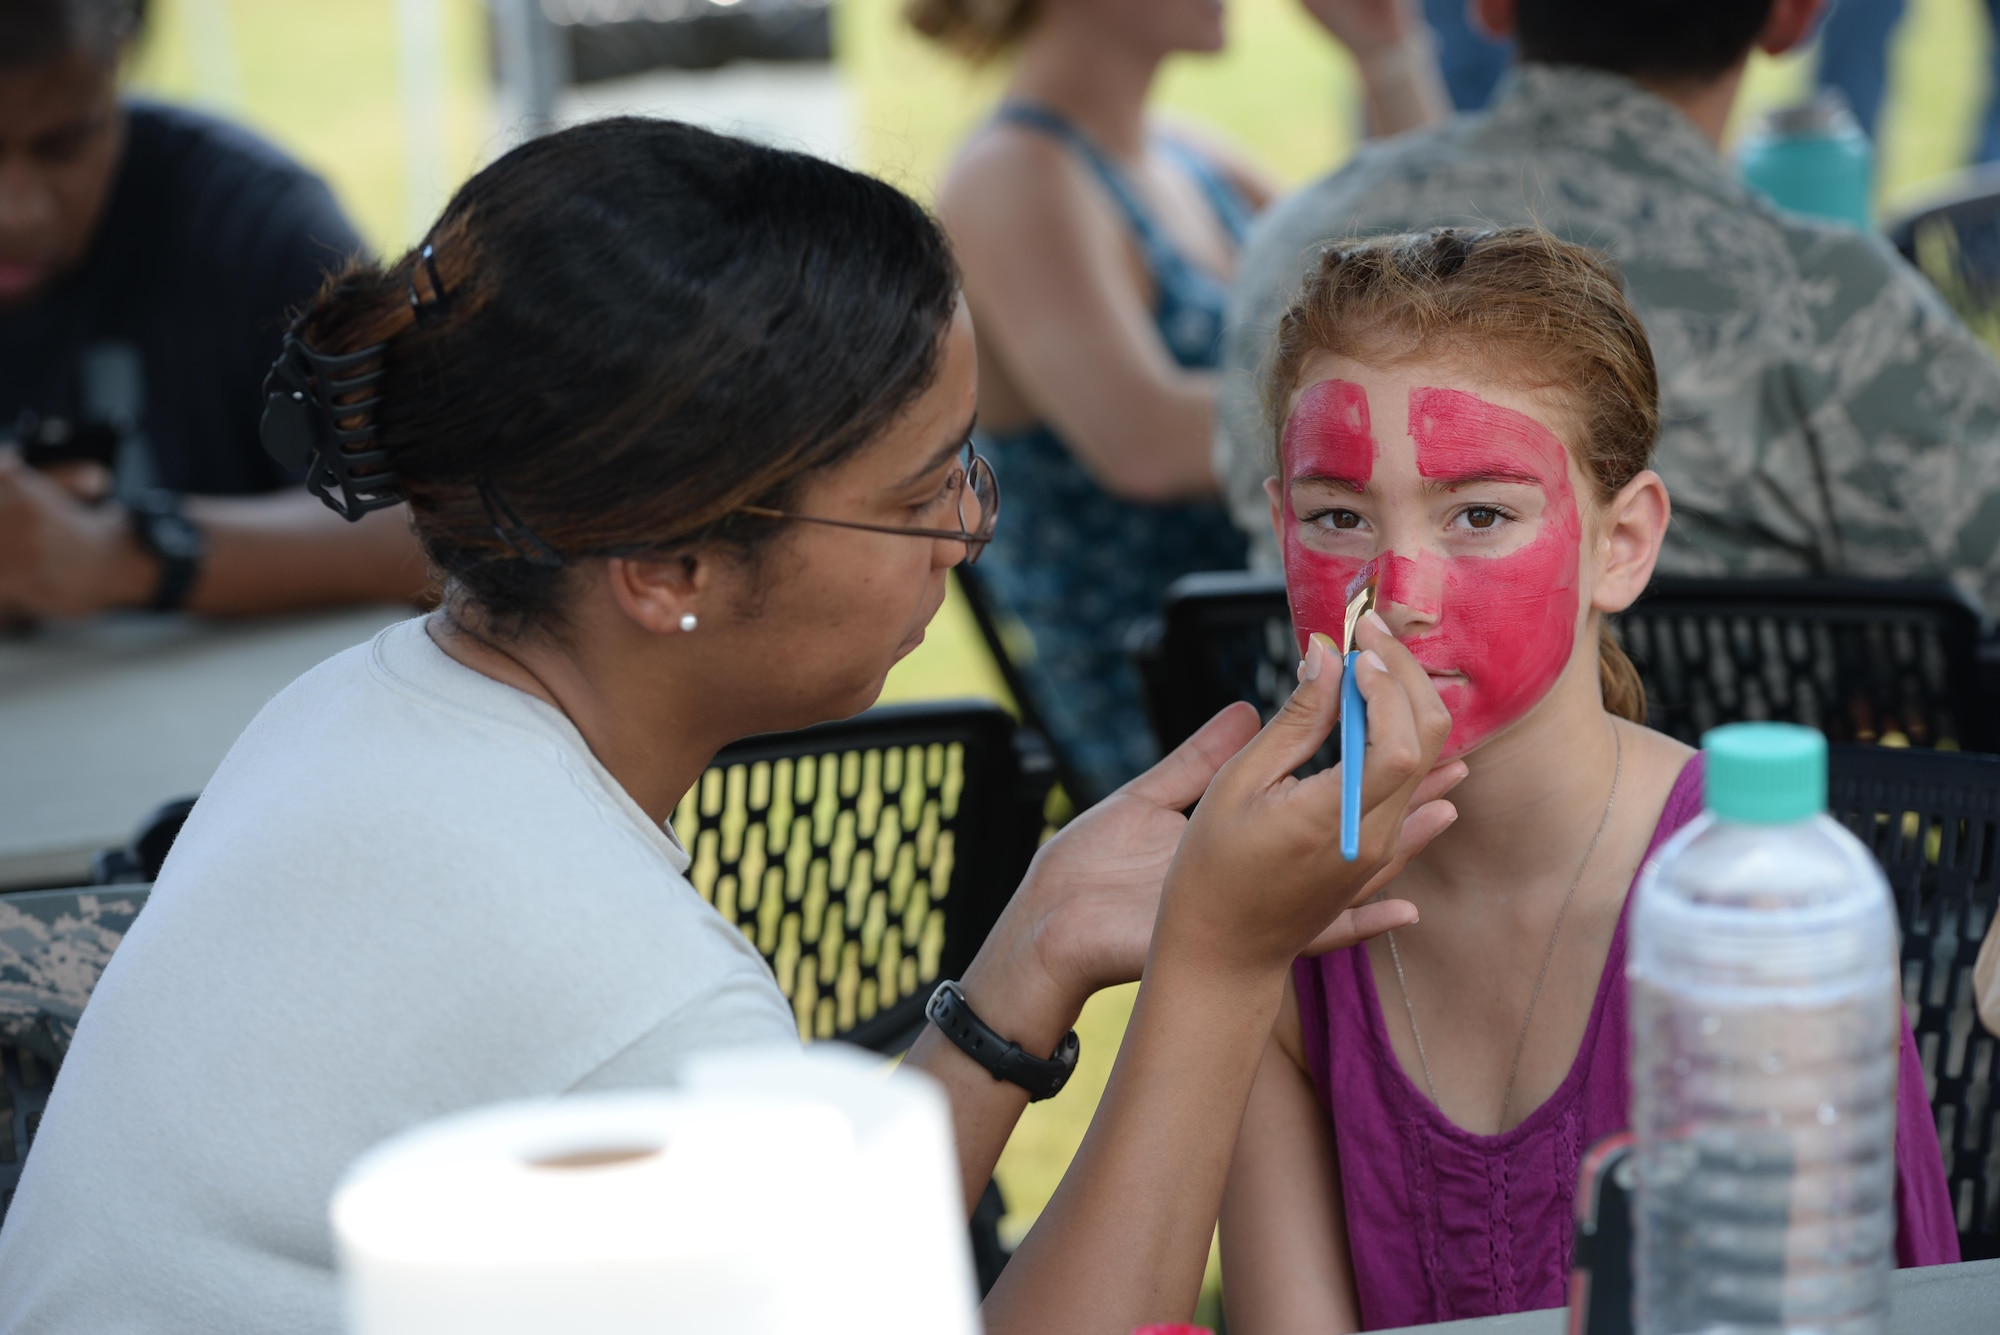 Senior Airman Nabila Ivaldi, the 14th Flying Training Wing Command Chief Executive Assistant, paints a superhero mask on Madison Shaw, daughter of John Ortiz, former staff sergeant from the 14th Security Forces Squadron, Aug. 4, 2017, on Columbus Air Force Base, Mississippi. Face painting, multiple inflatable water slides and a dunk tank were available at the End of Summer Bash, a family friendly event on Columbus AFB. (U.S. Air Force photo by Airman 1st Class Keith Holcomb)